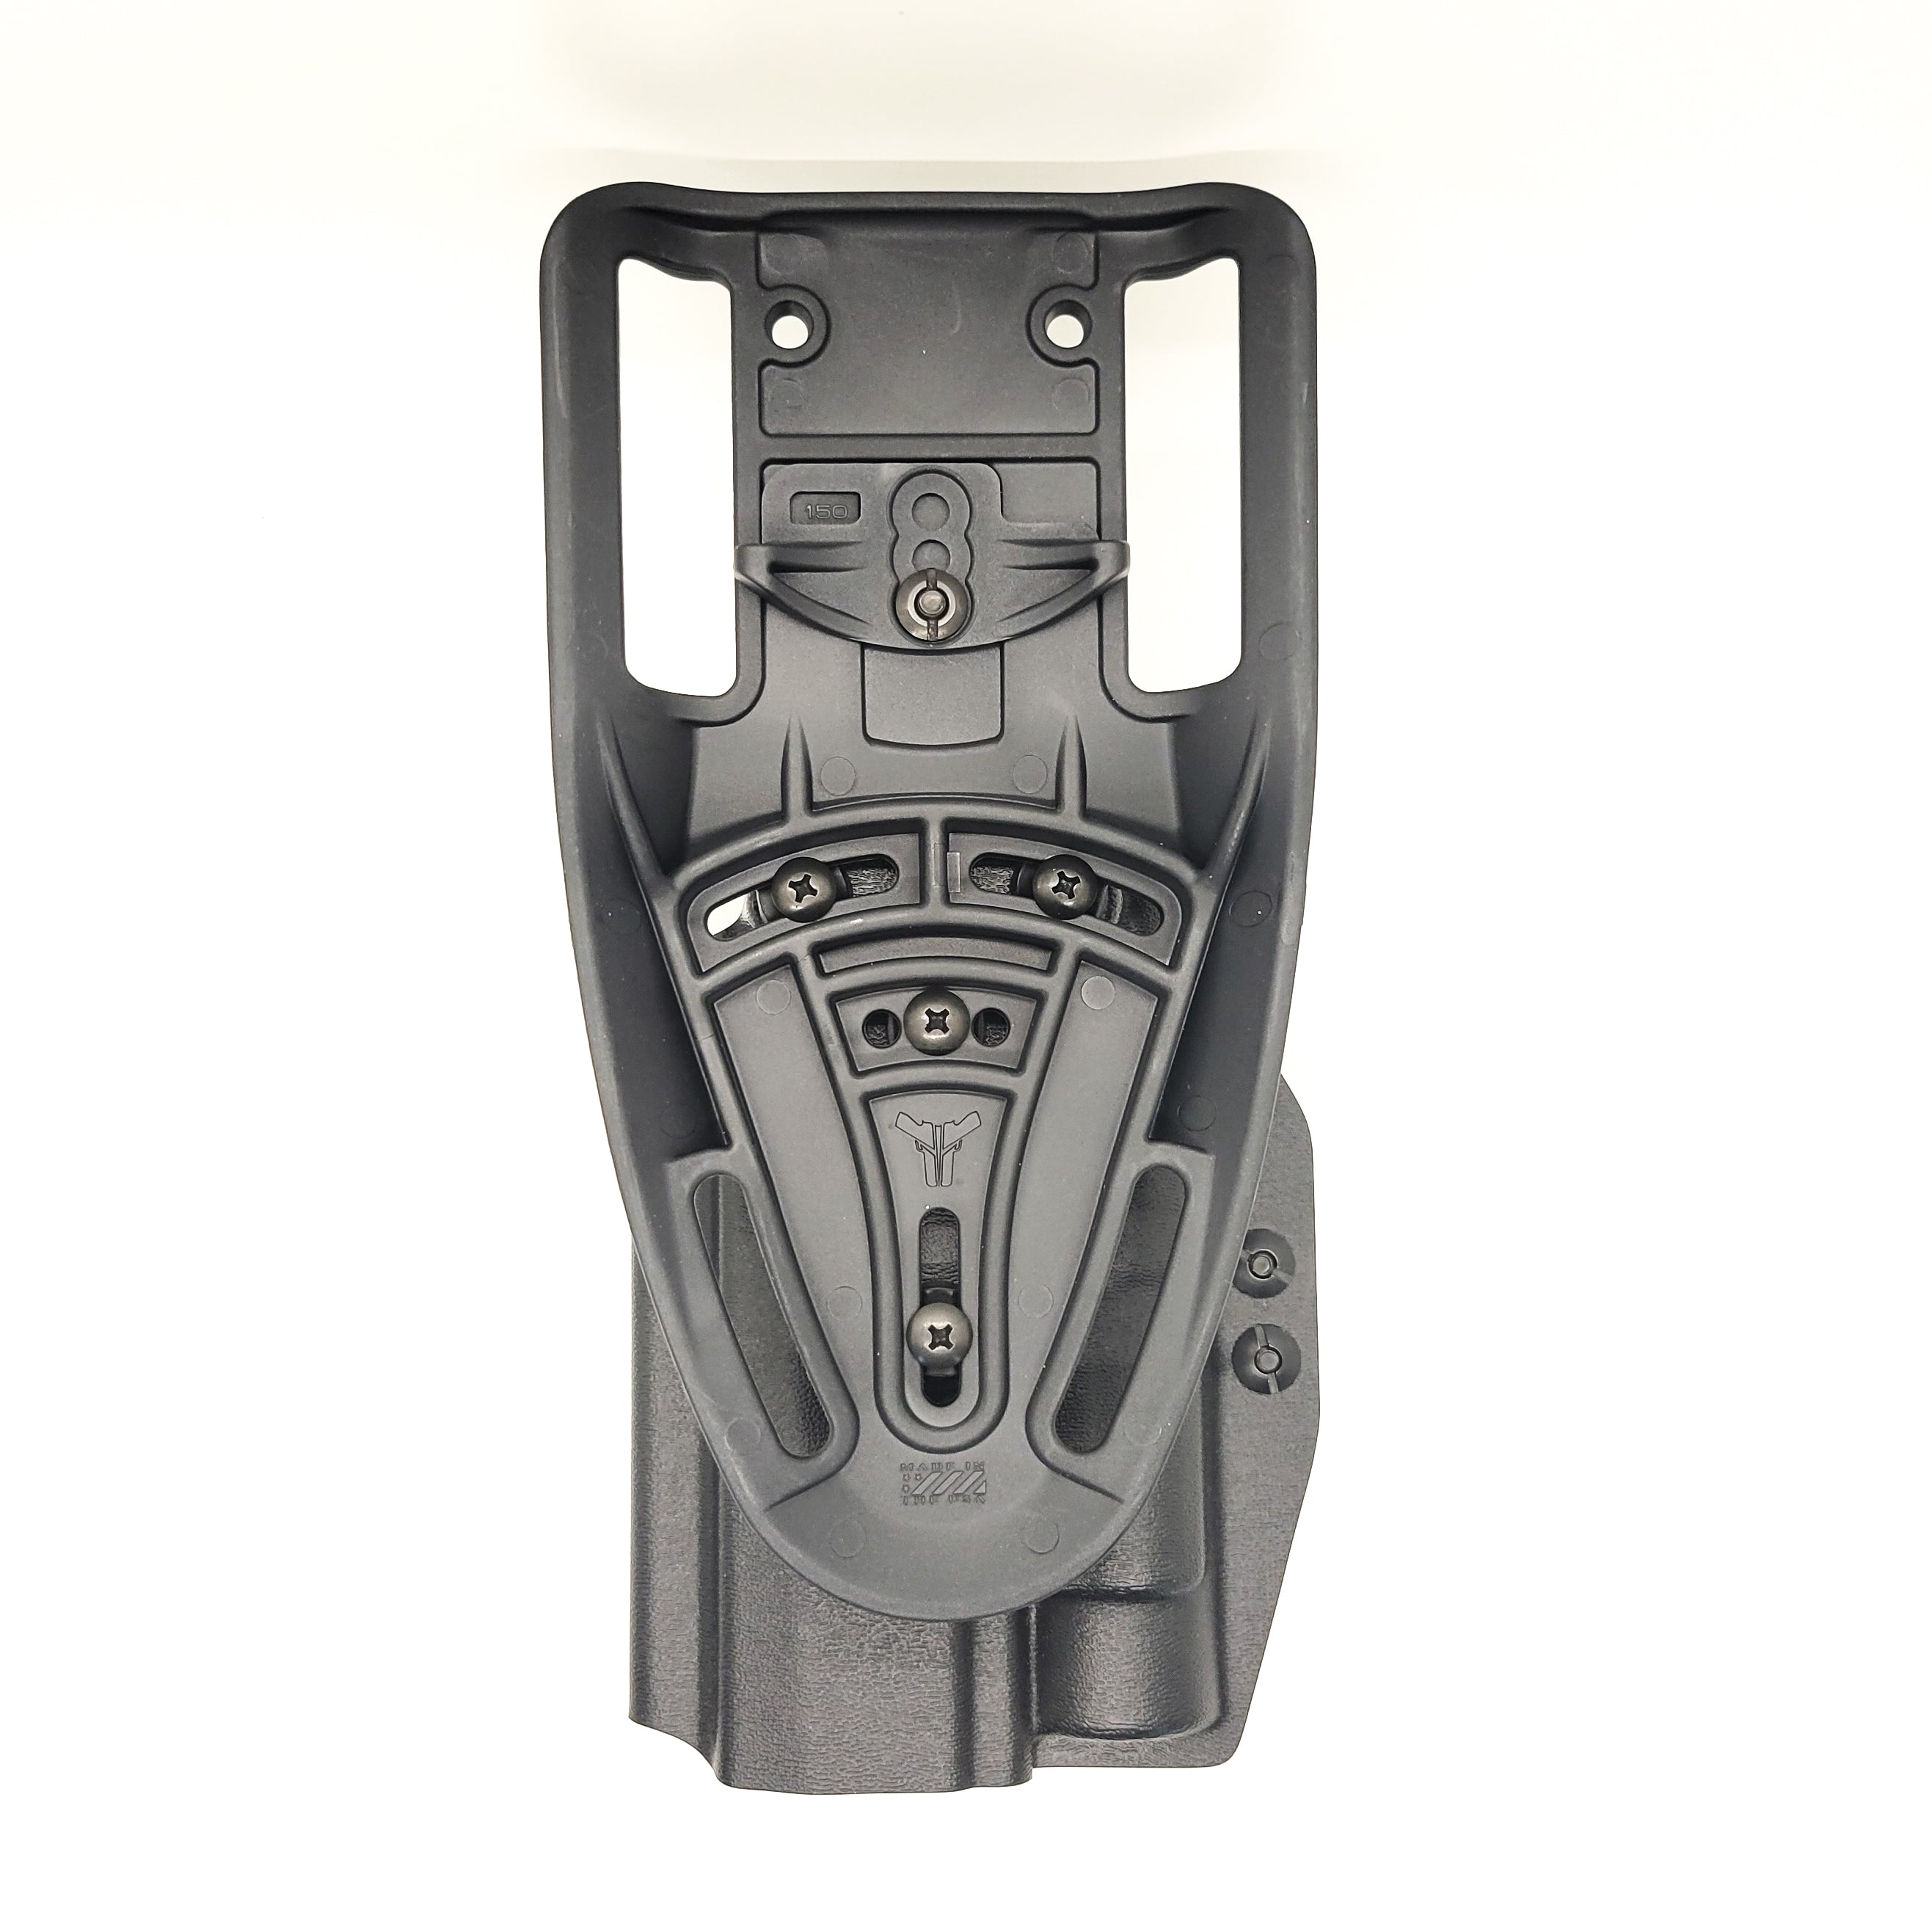 Outside Waistband Holster designed to fit the Full Size and Carry P320 series with Streamlight TLR-1 and TLR-1HL weapon mounted light and GoGuns USA Gas Pedal Holster will accommodate the M17, M18, and X-Five models as well as the Carry and Compact using our competition belt mounting options. Made in USA.